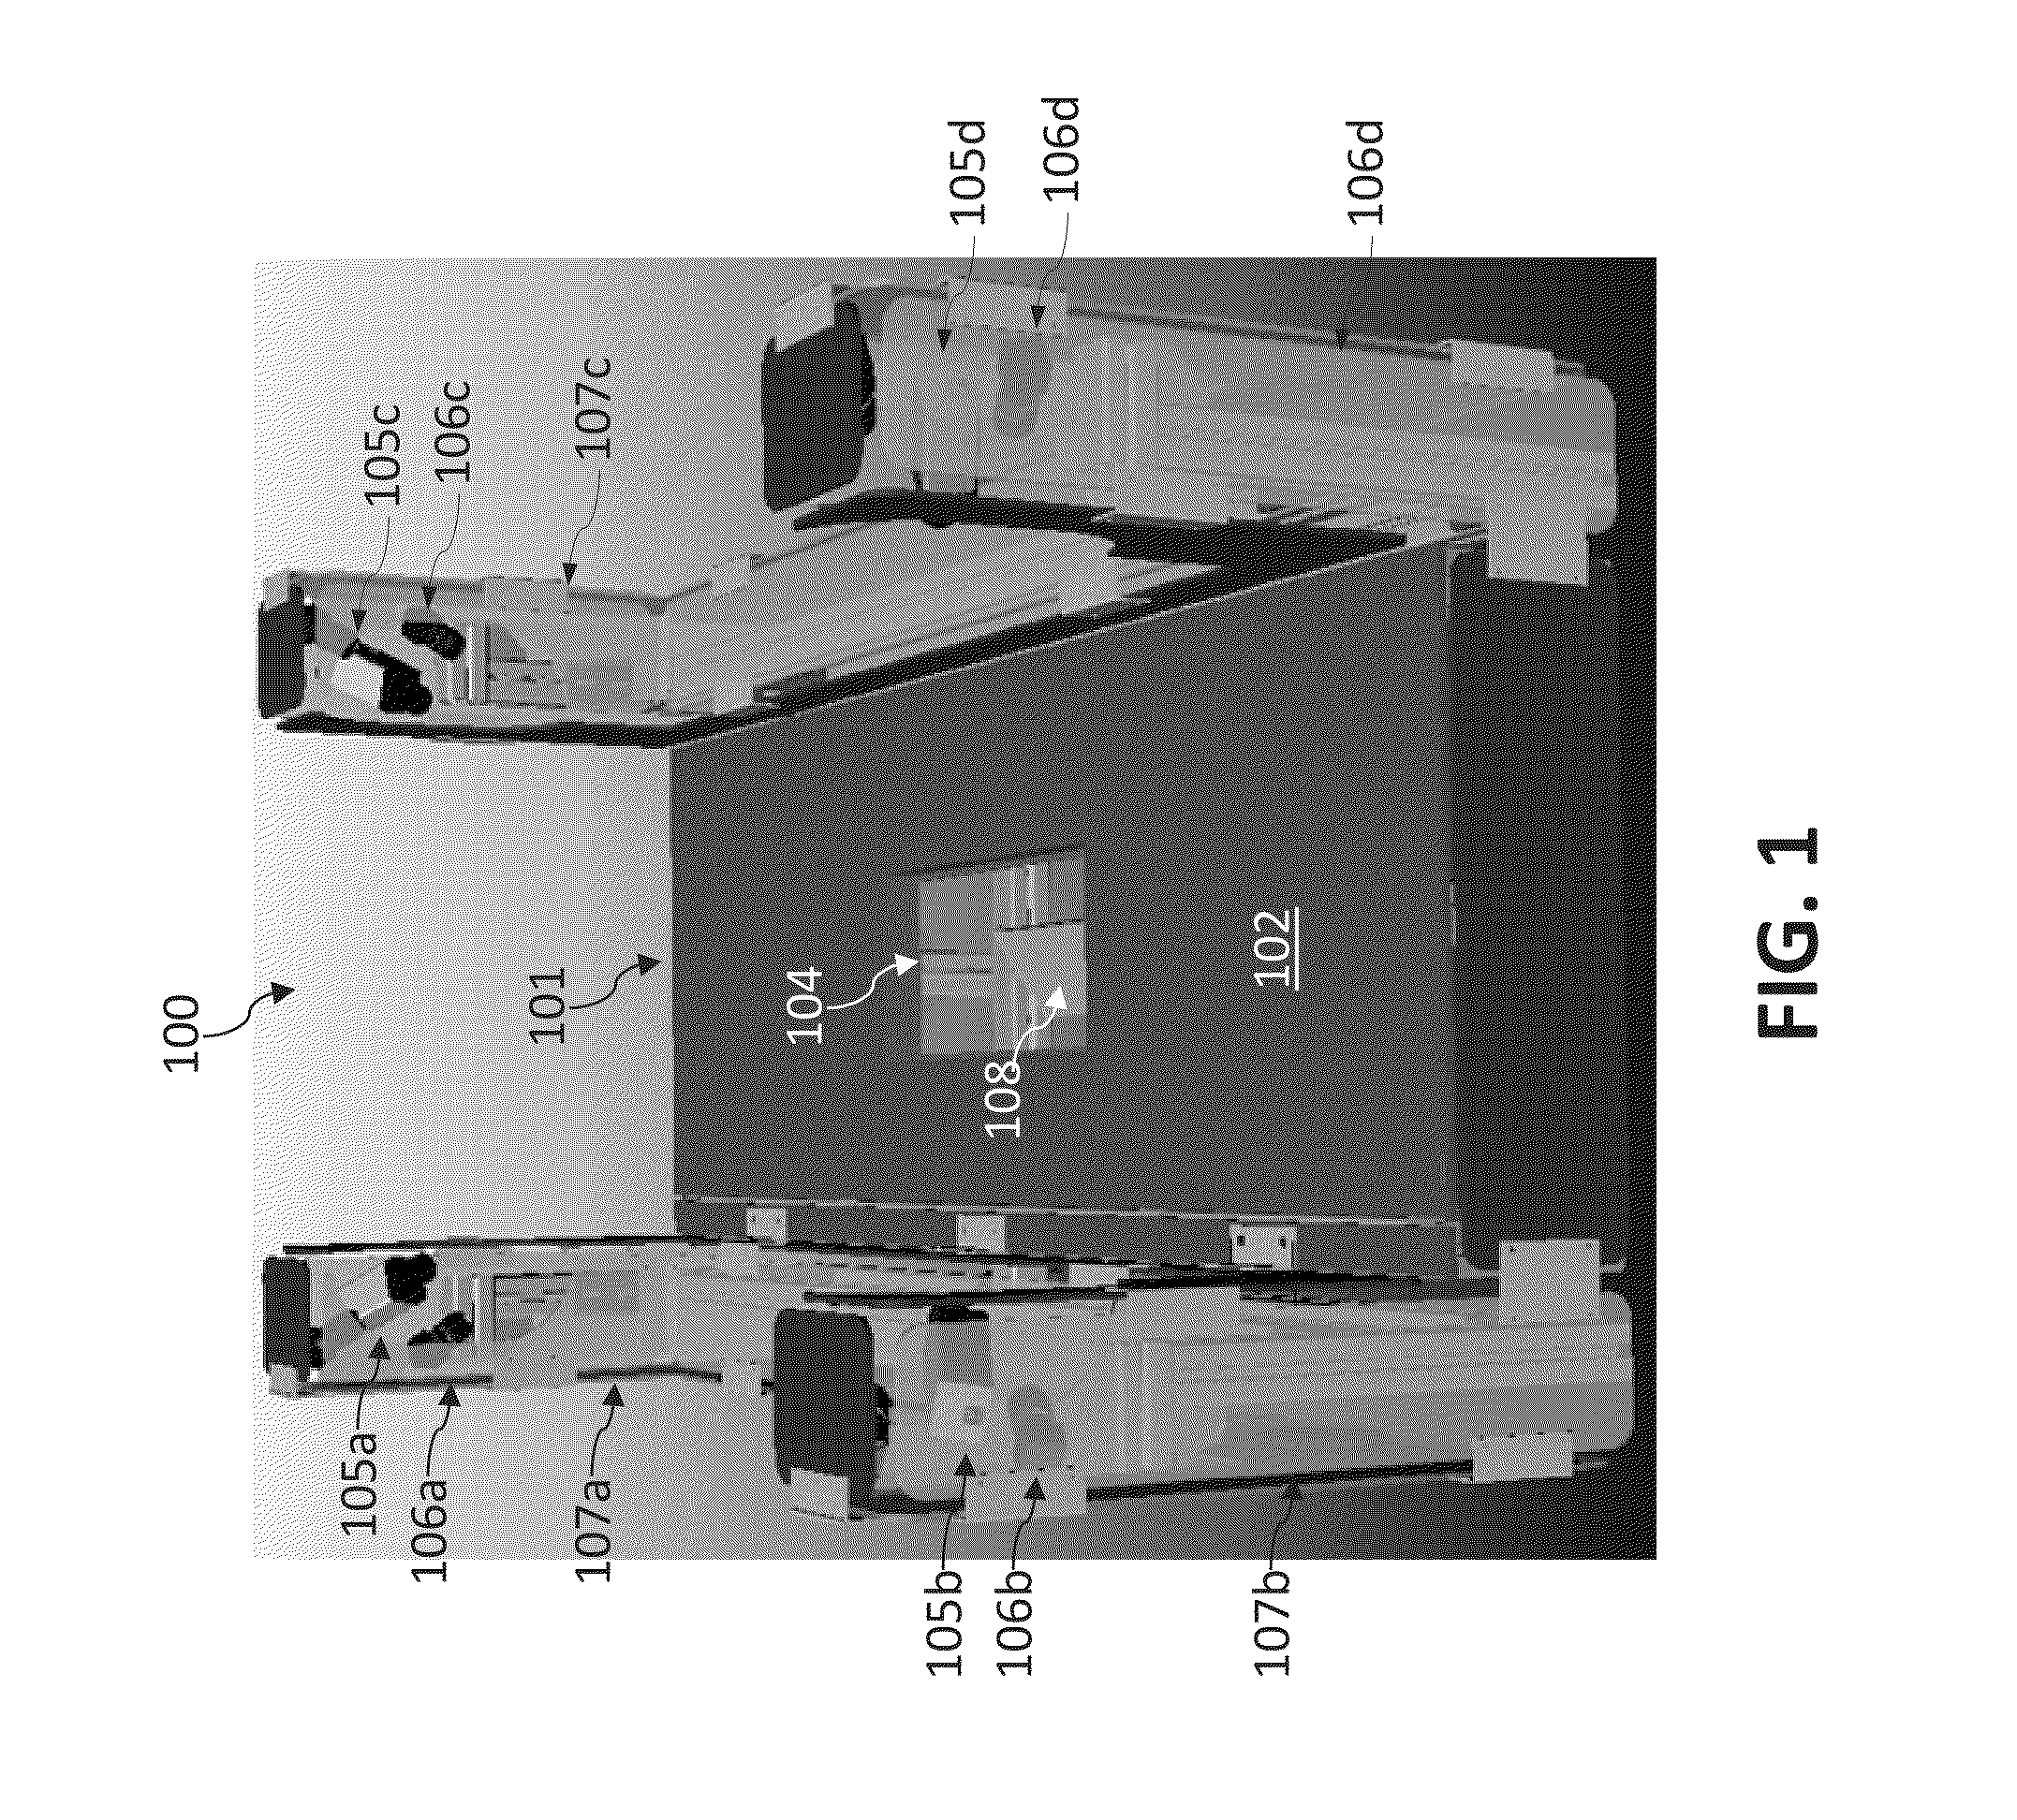 Anatomical imaging system for product customization and methods of use thereof